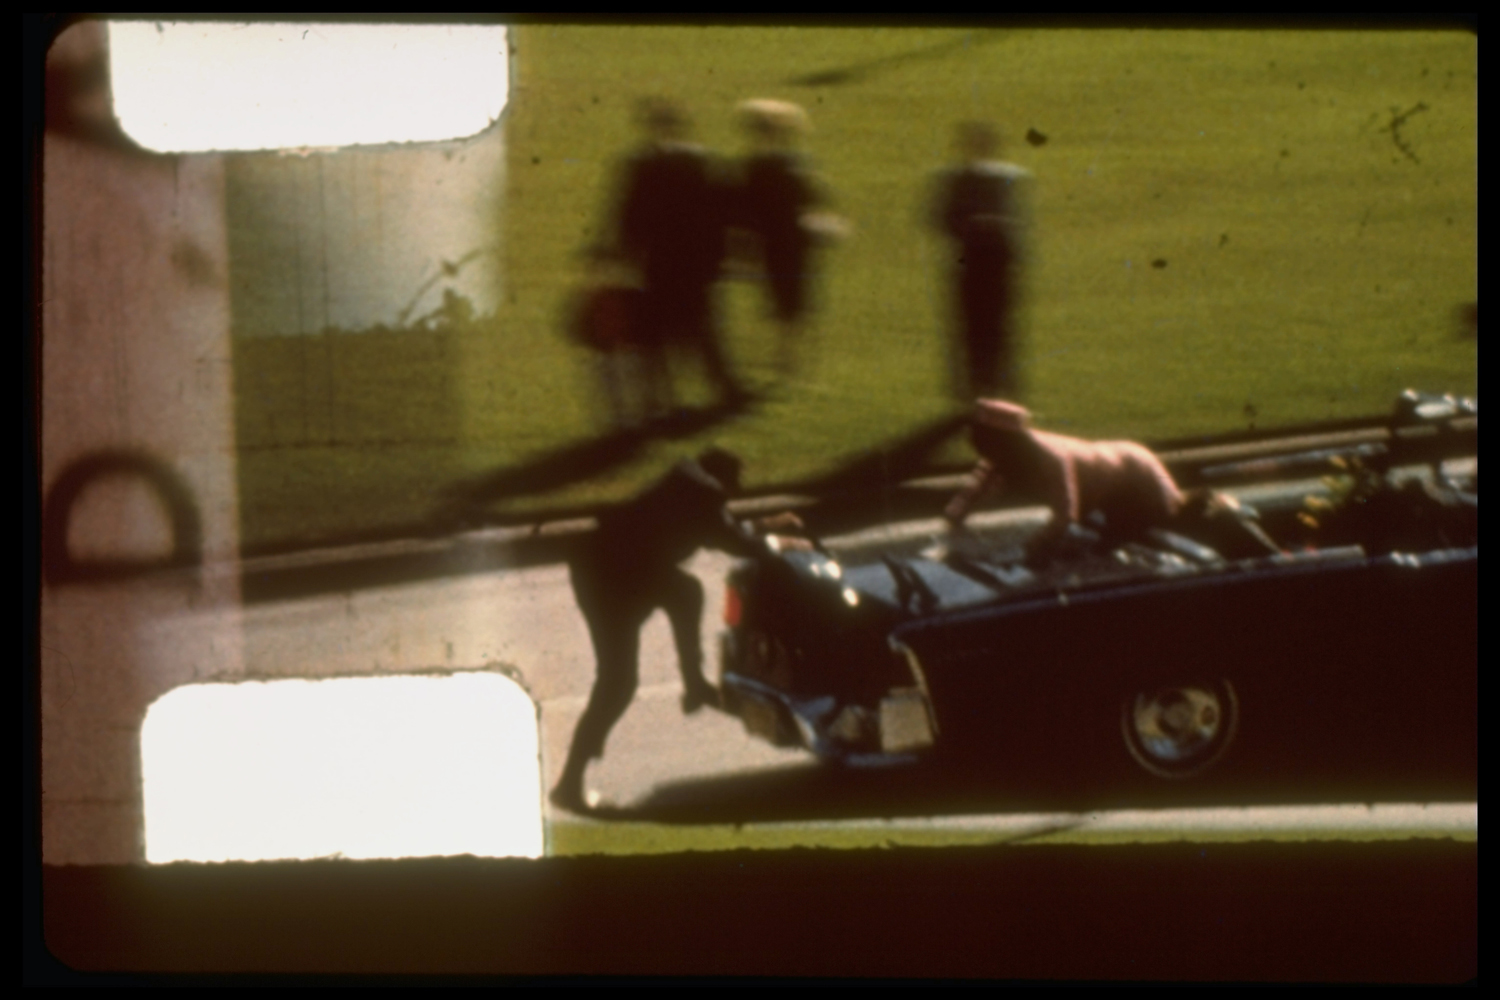 Zapruder film frame #372 of Kennedy assassination showing Mrs. Kennedy climbing towards Secret Service agent who is attempting to board back of limousine after Pres. Kennedy has been shot. Dallas. United States. Nov. 22, 1963.